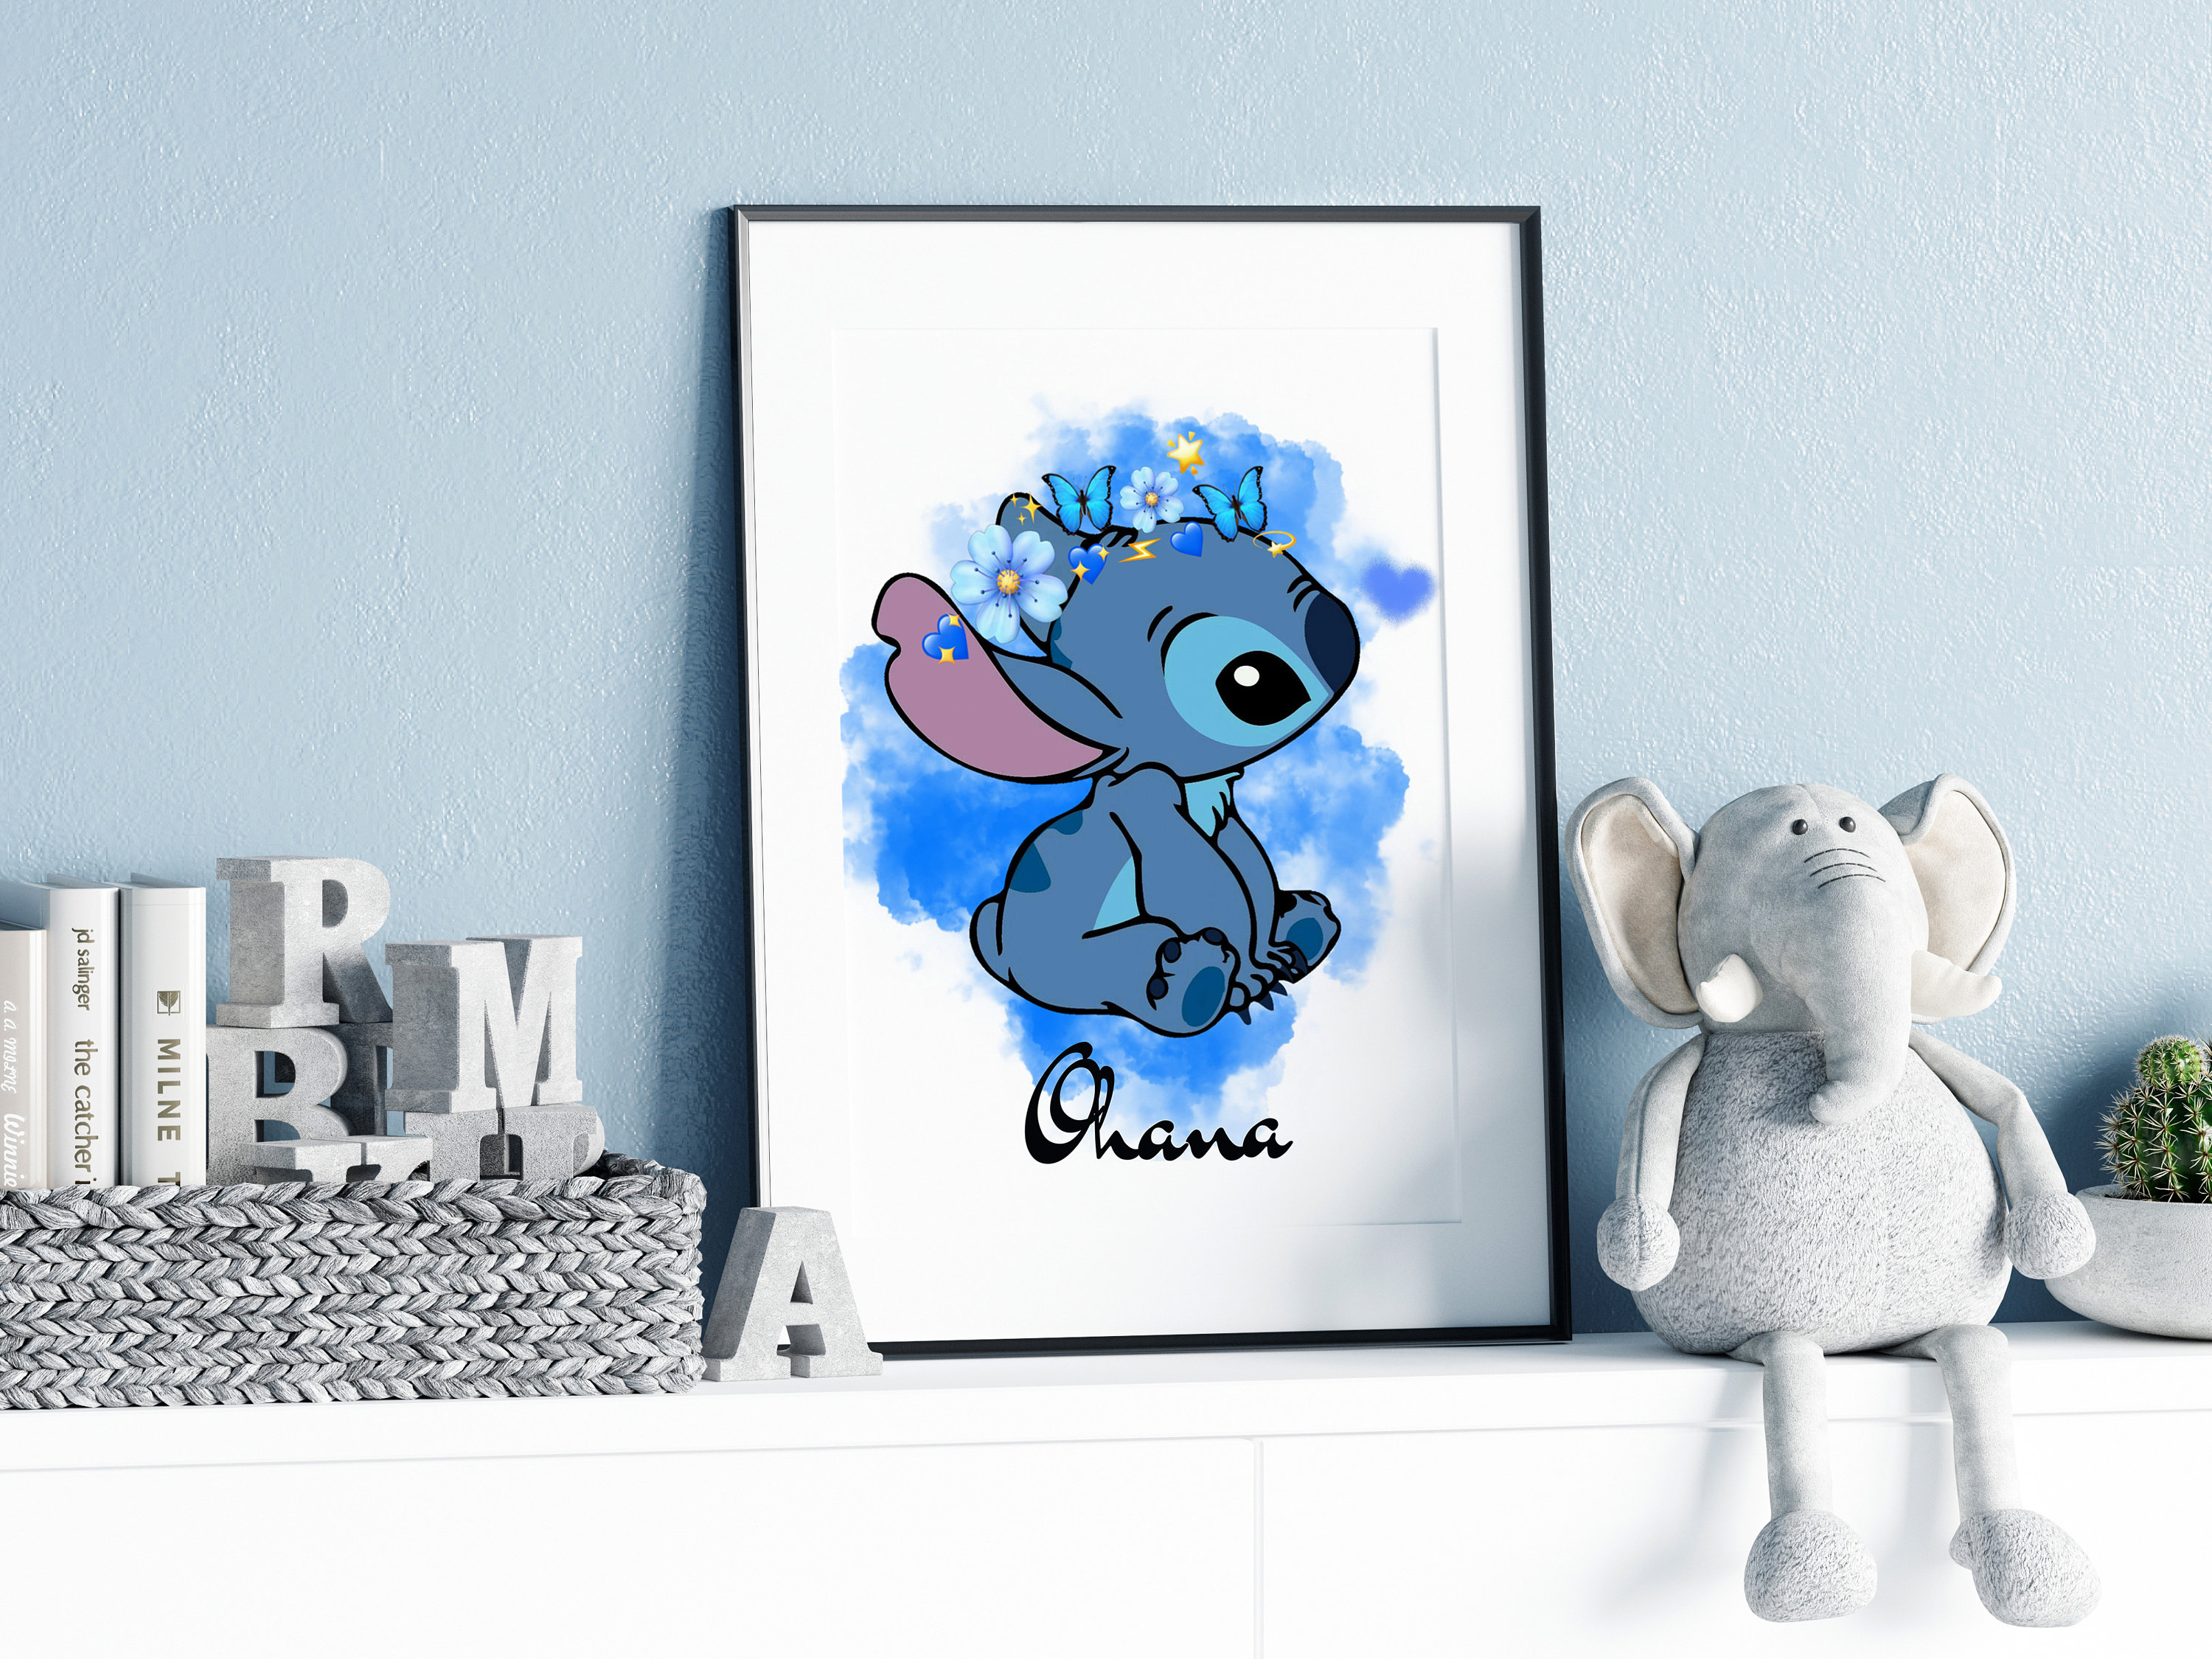 Lilo & Stitch Wall Art - Set of 3 (8 Inches x 10 inches) Ohana Means Family Poster Prints Coachella Watercolor Quote, Nursery